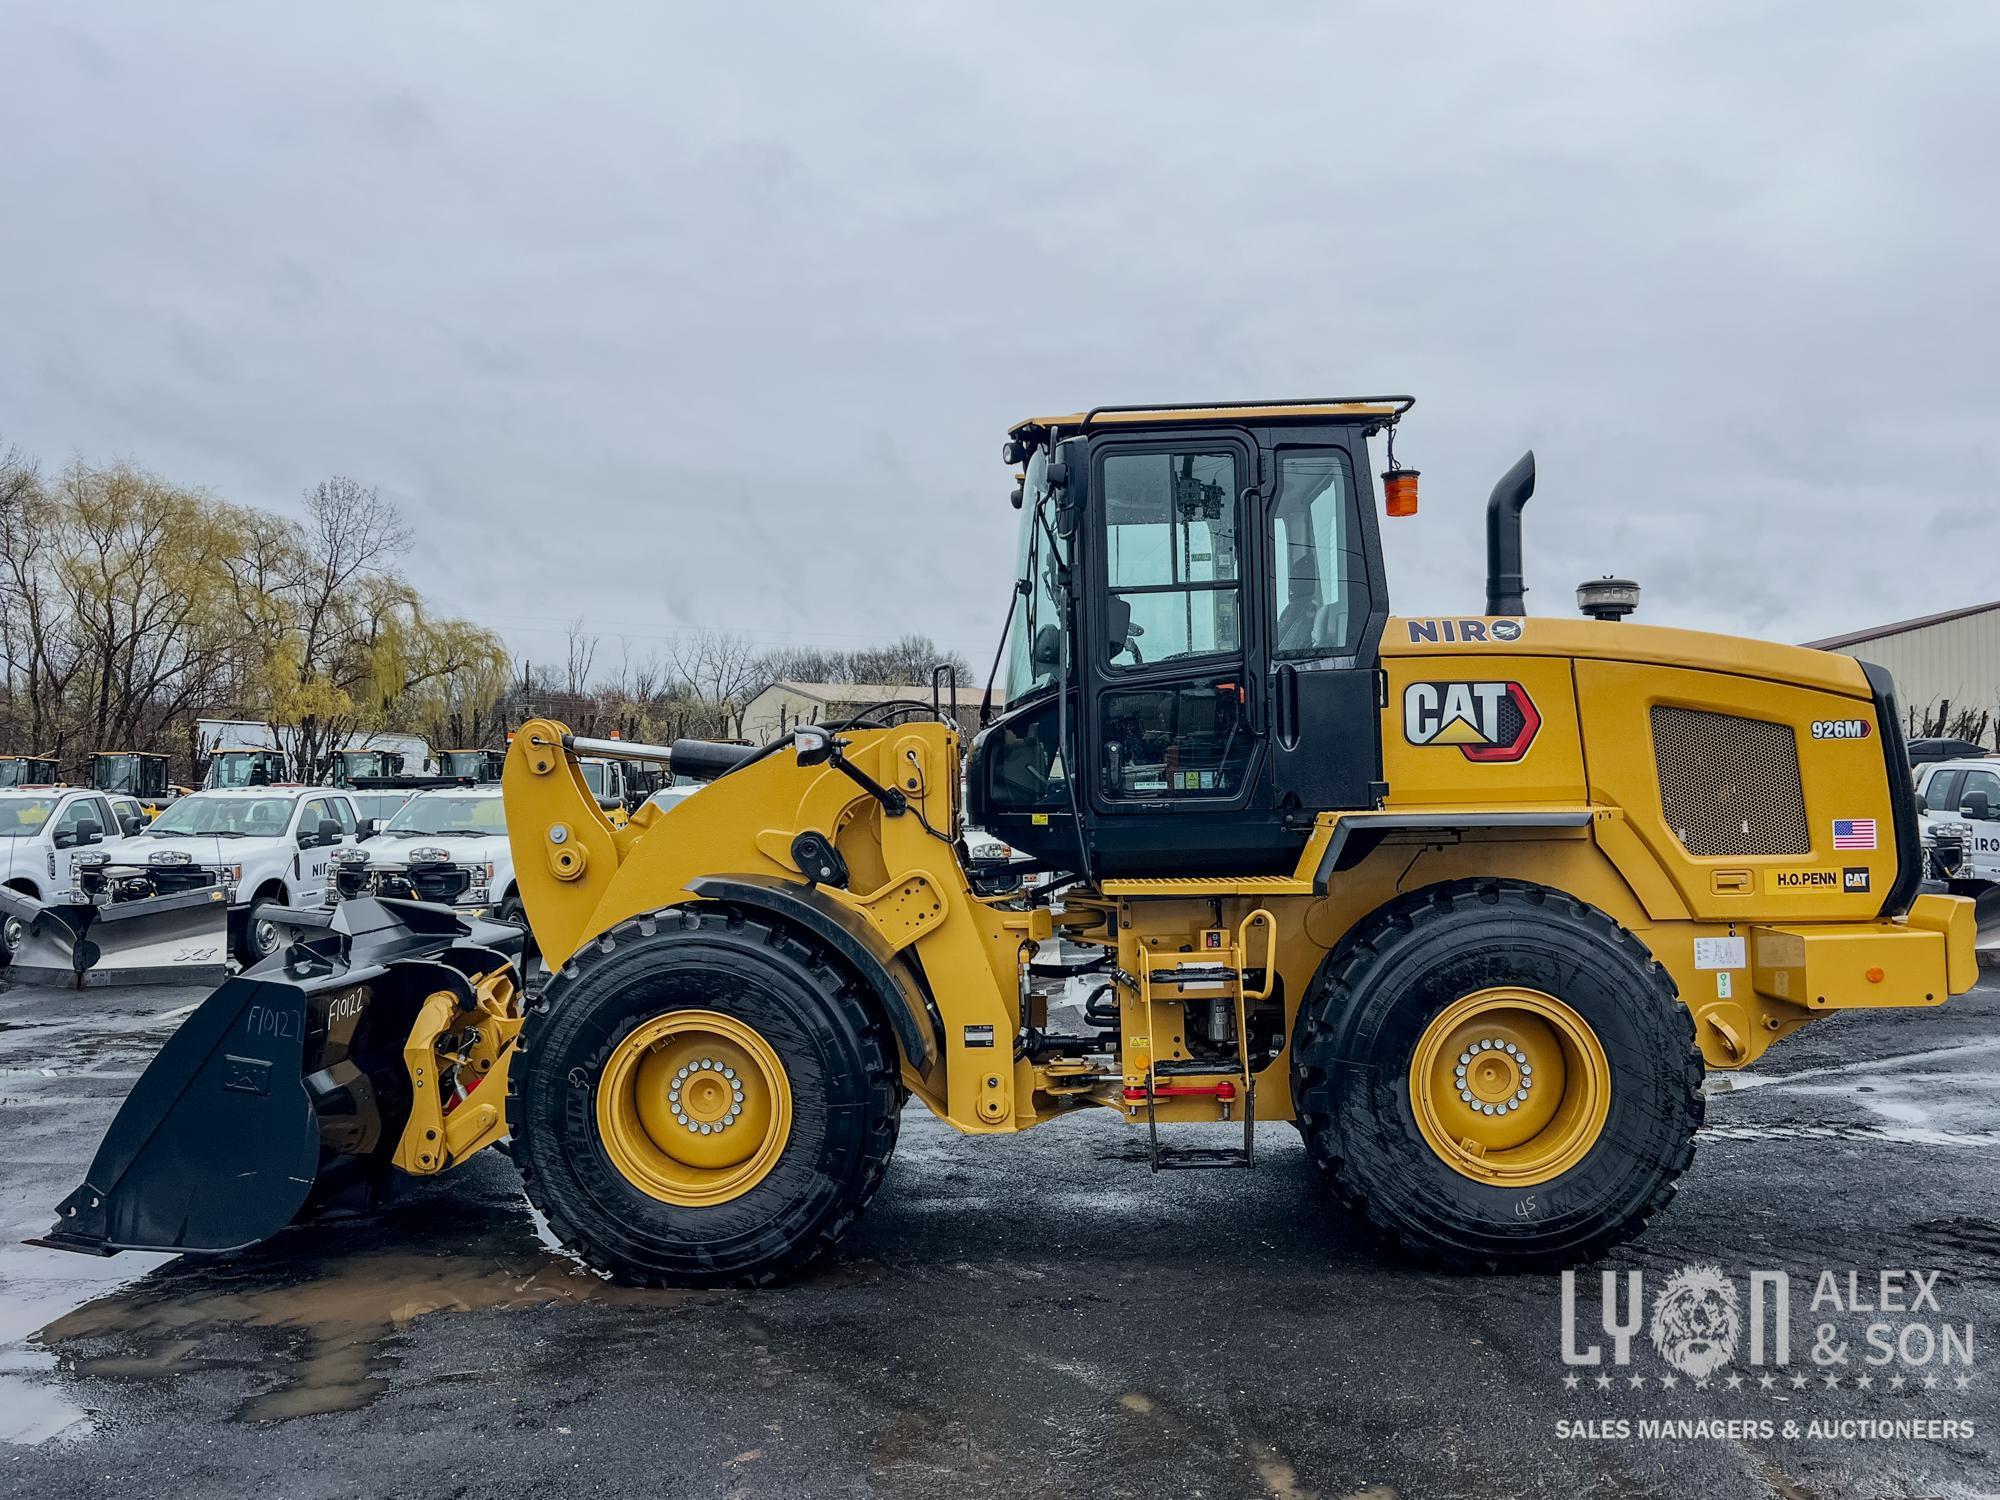 2023 CAT 926M RUBBER TIRED LOADER... SN-03443 powered by C7.1 ACERT diesel engine, 153hp, equipped